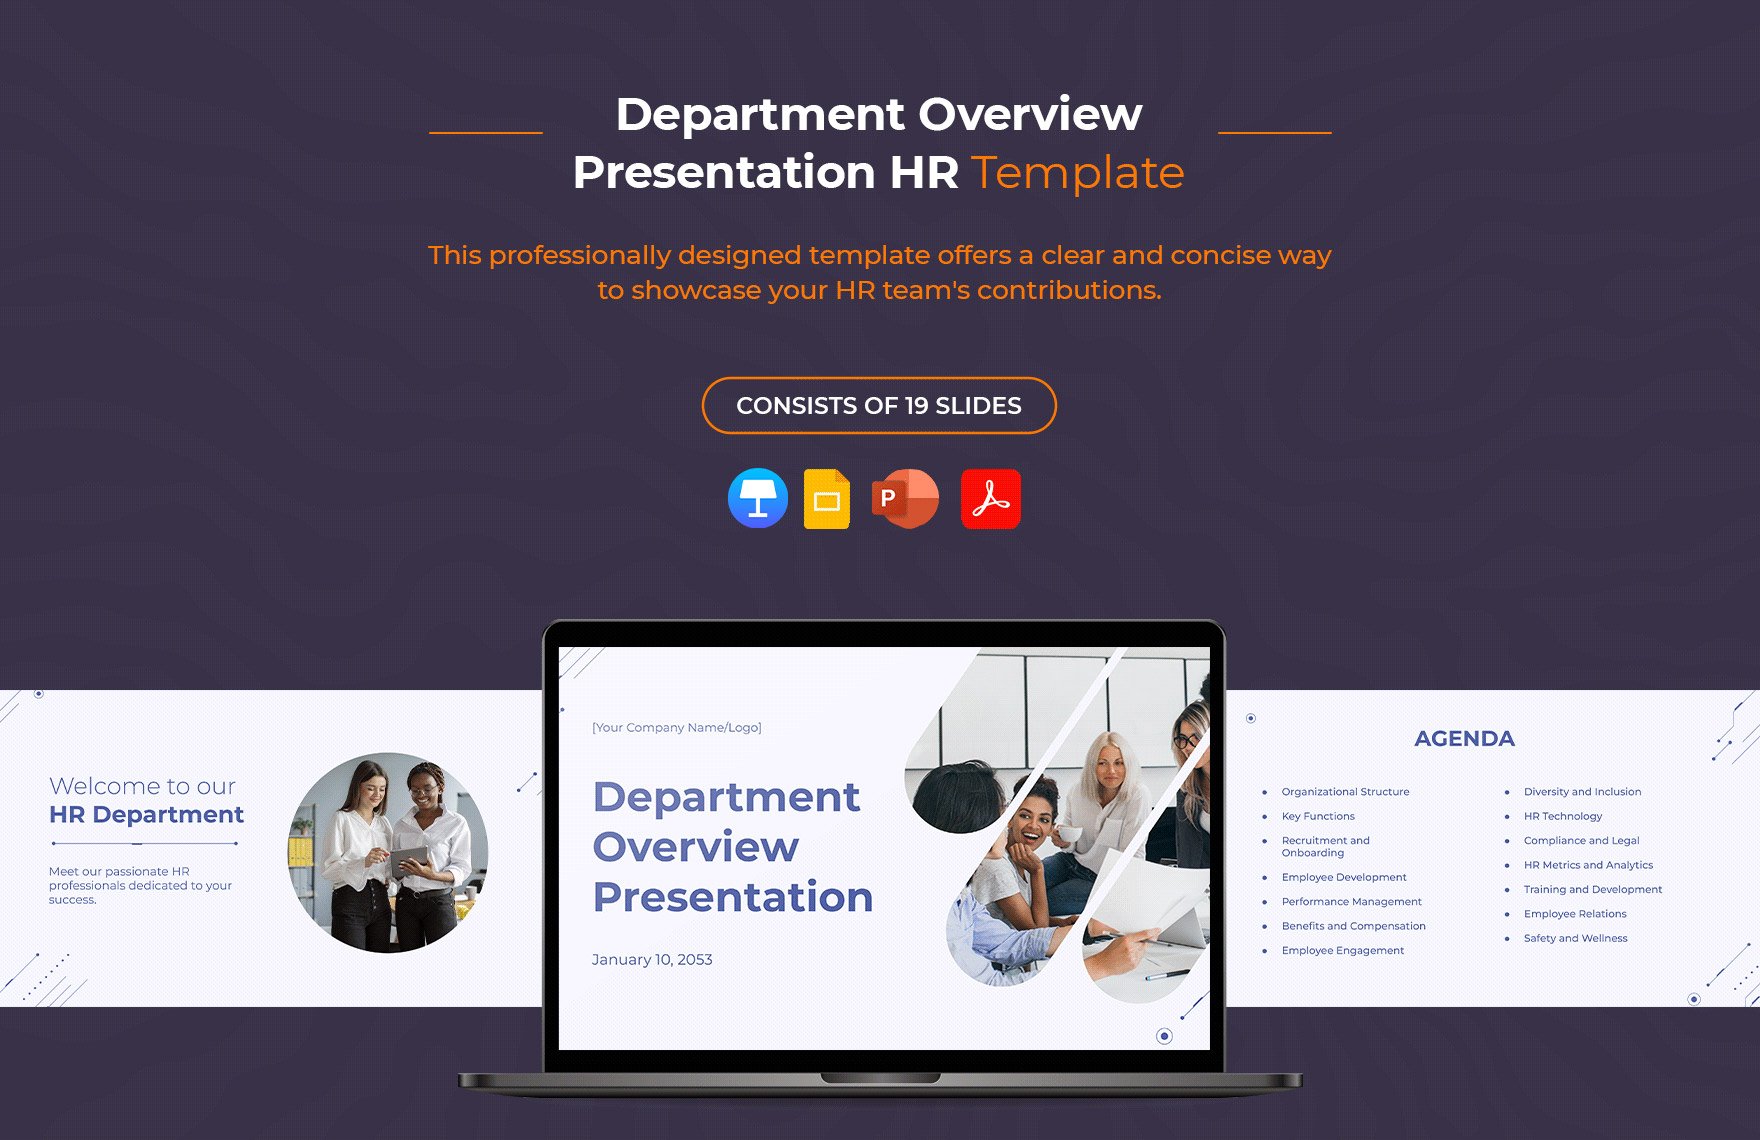 Department Overview Presentation HR Template